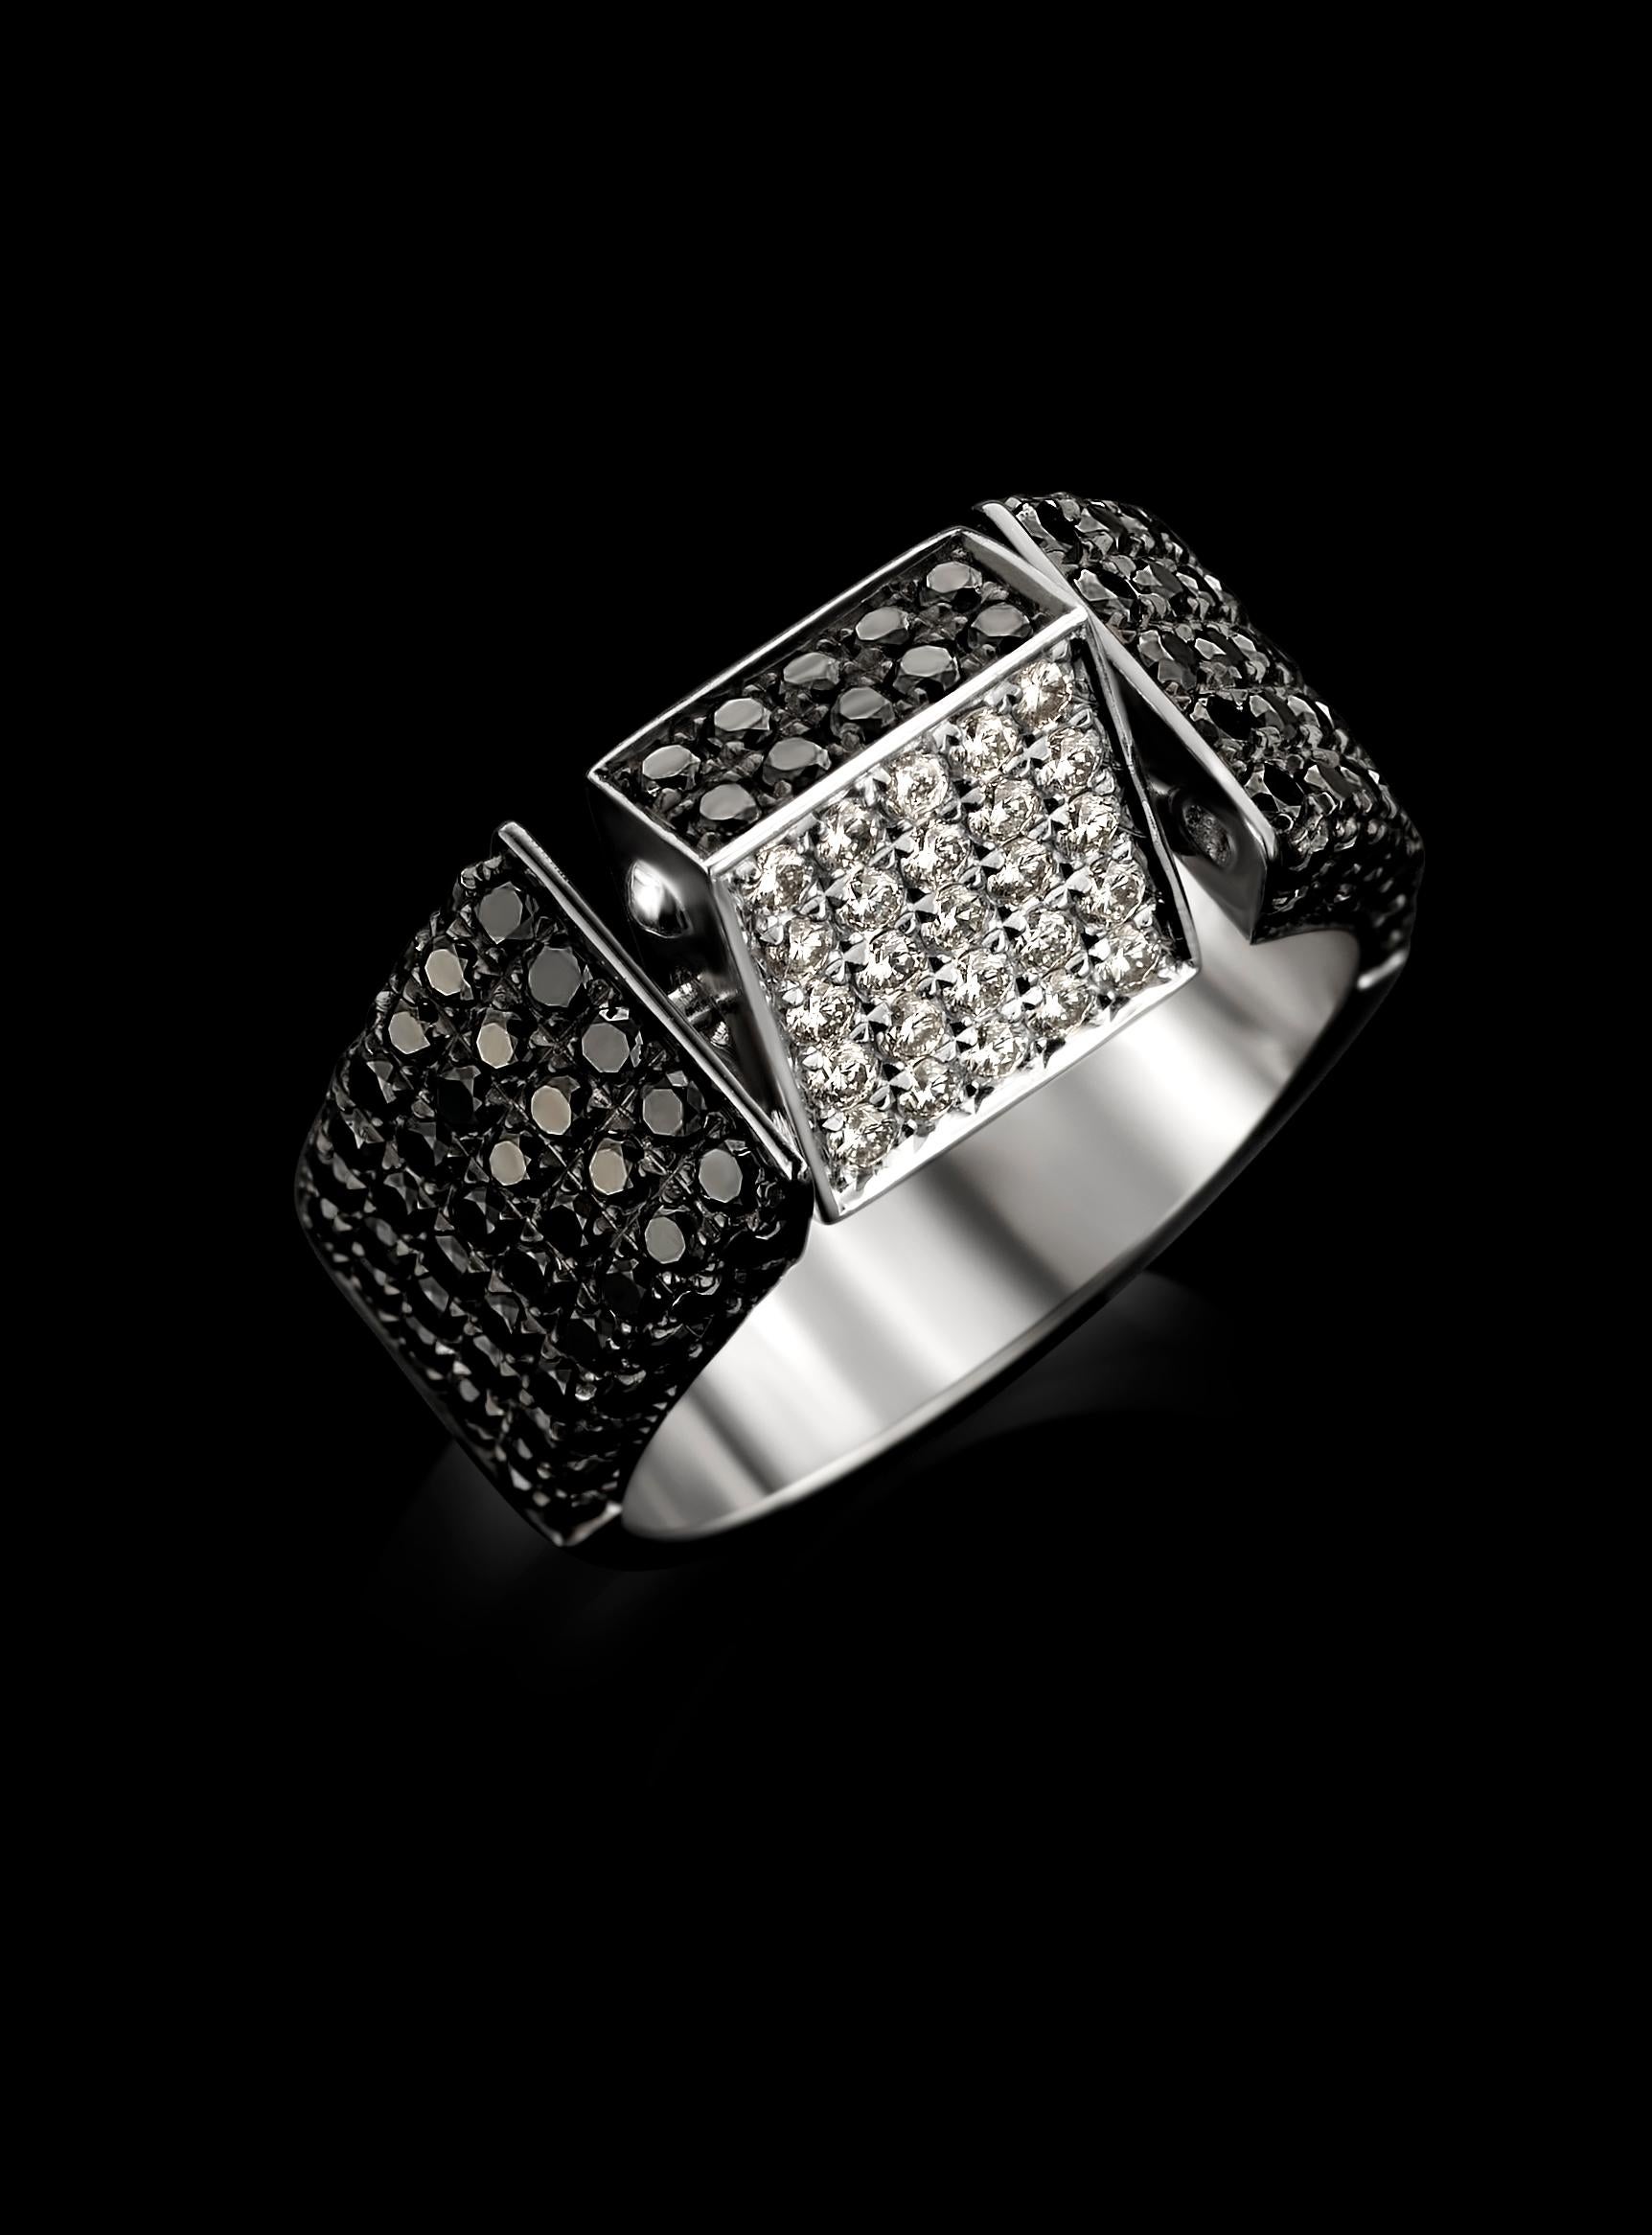 This square signet-inspired ring is expertly crafted by hand from 18-karat white gold, while the top and side are bedecked with an array of 0.32ct white and 2.95ct black diamonds.
Certified by International Gemological Institute Antwerp.
This ring